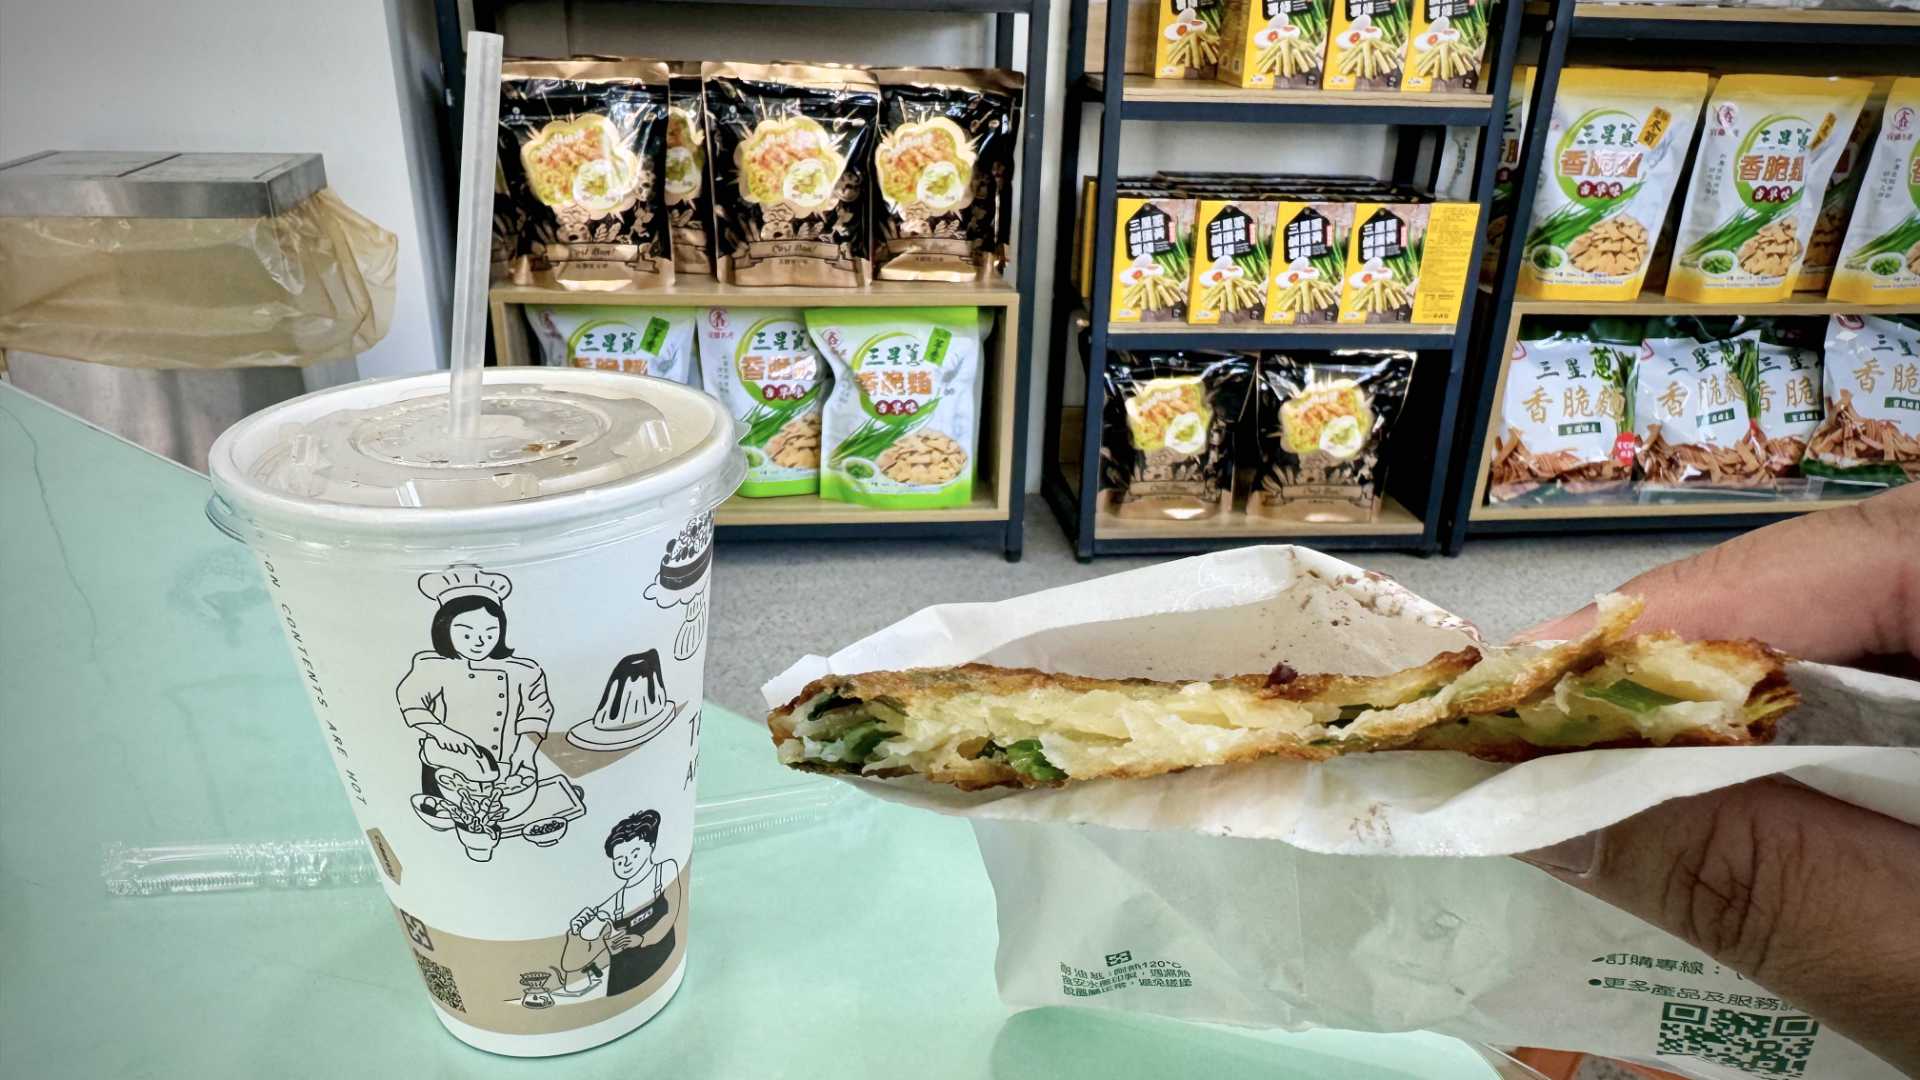 A take-out cup on a table, and a hand holding a paper bag that contains a partially-eaten scallion pancake.